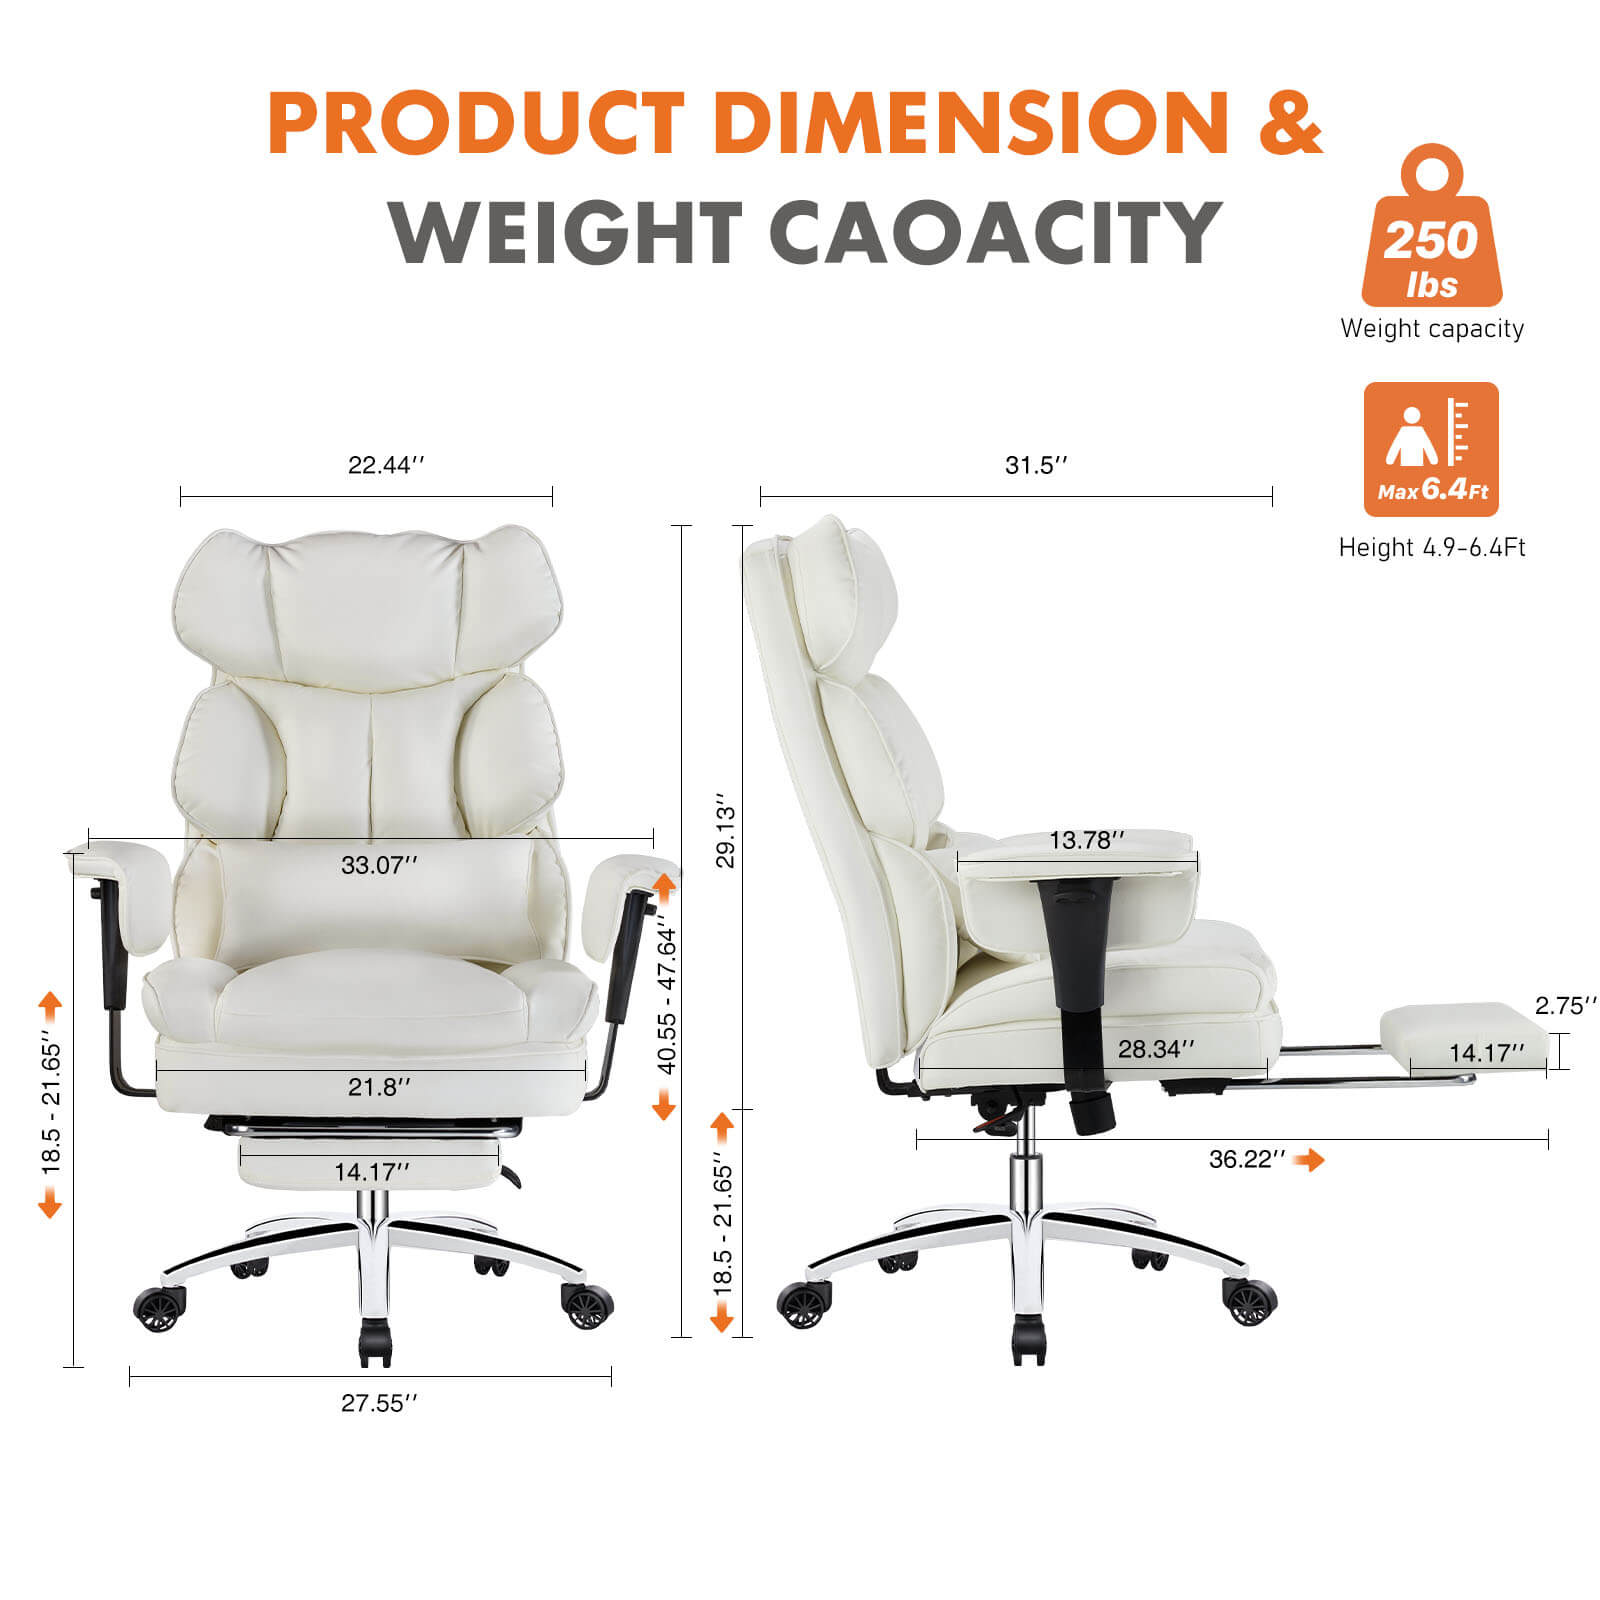 Office Computer Chair - High Back PU Leather Taipan Swivel Chair with Ergonomic Leg Rest and Lumbar Support, Height Adjustable